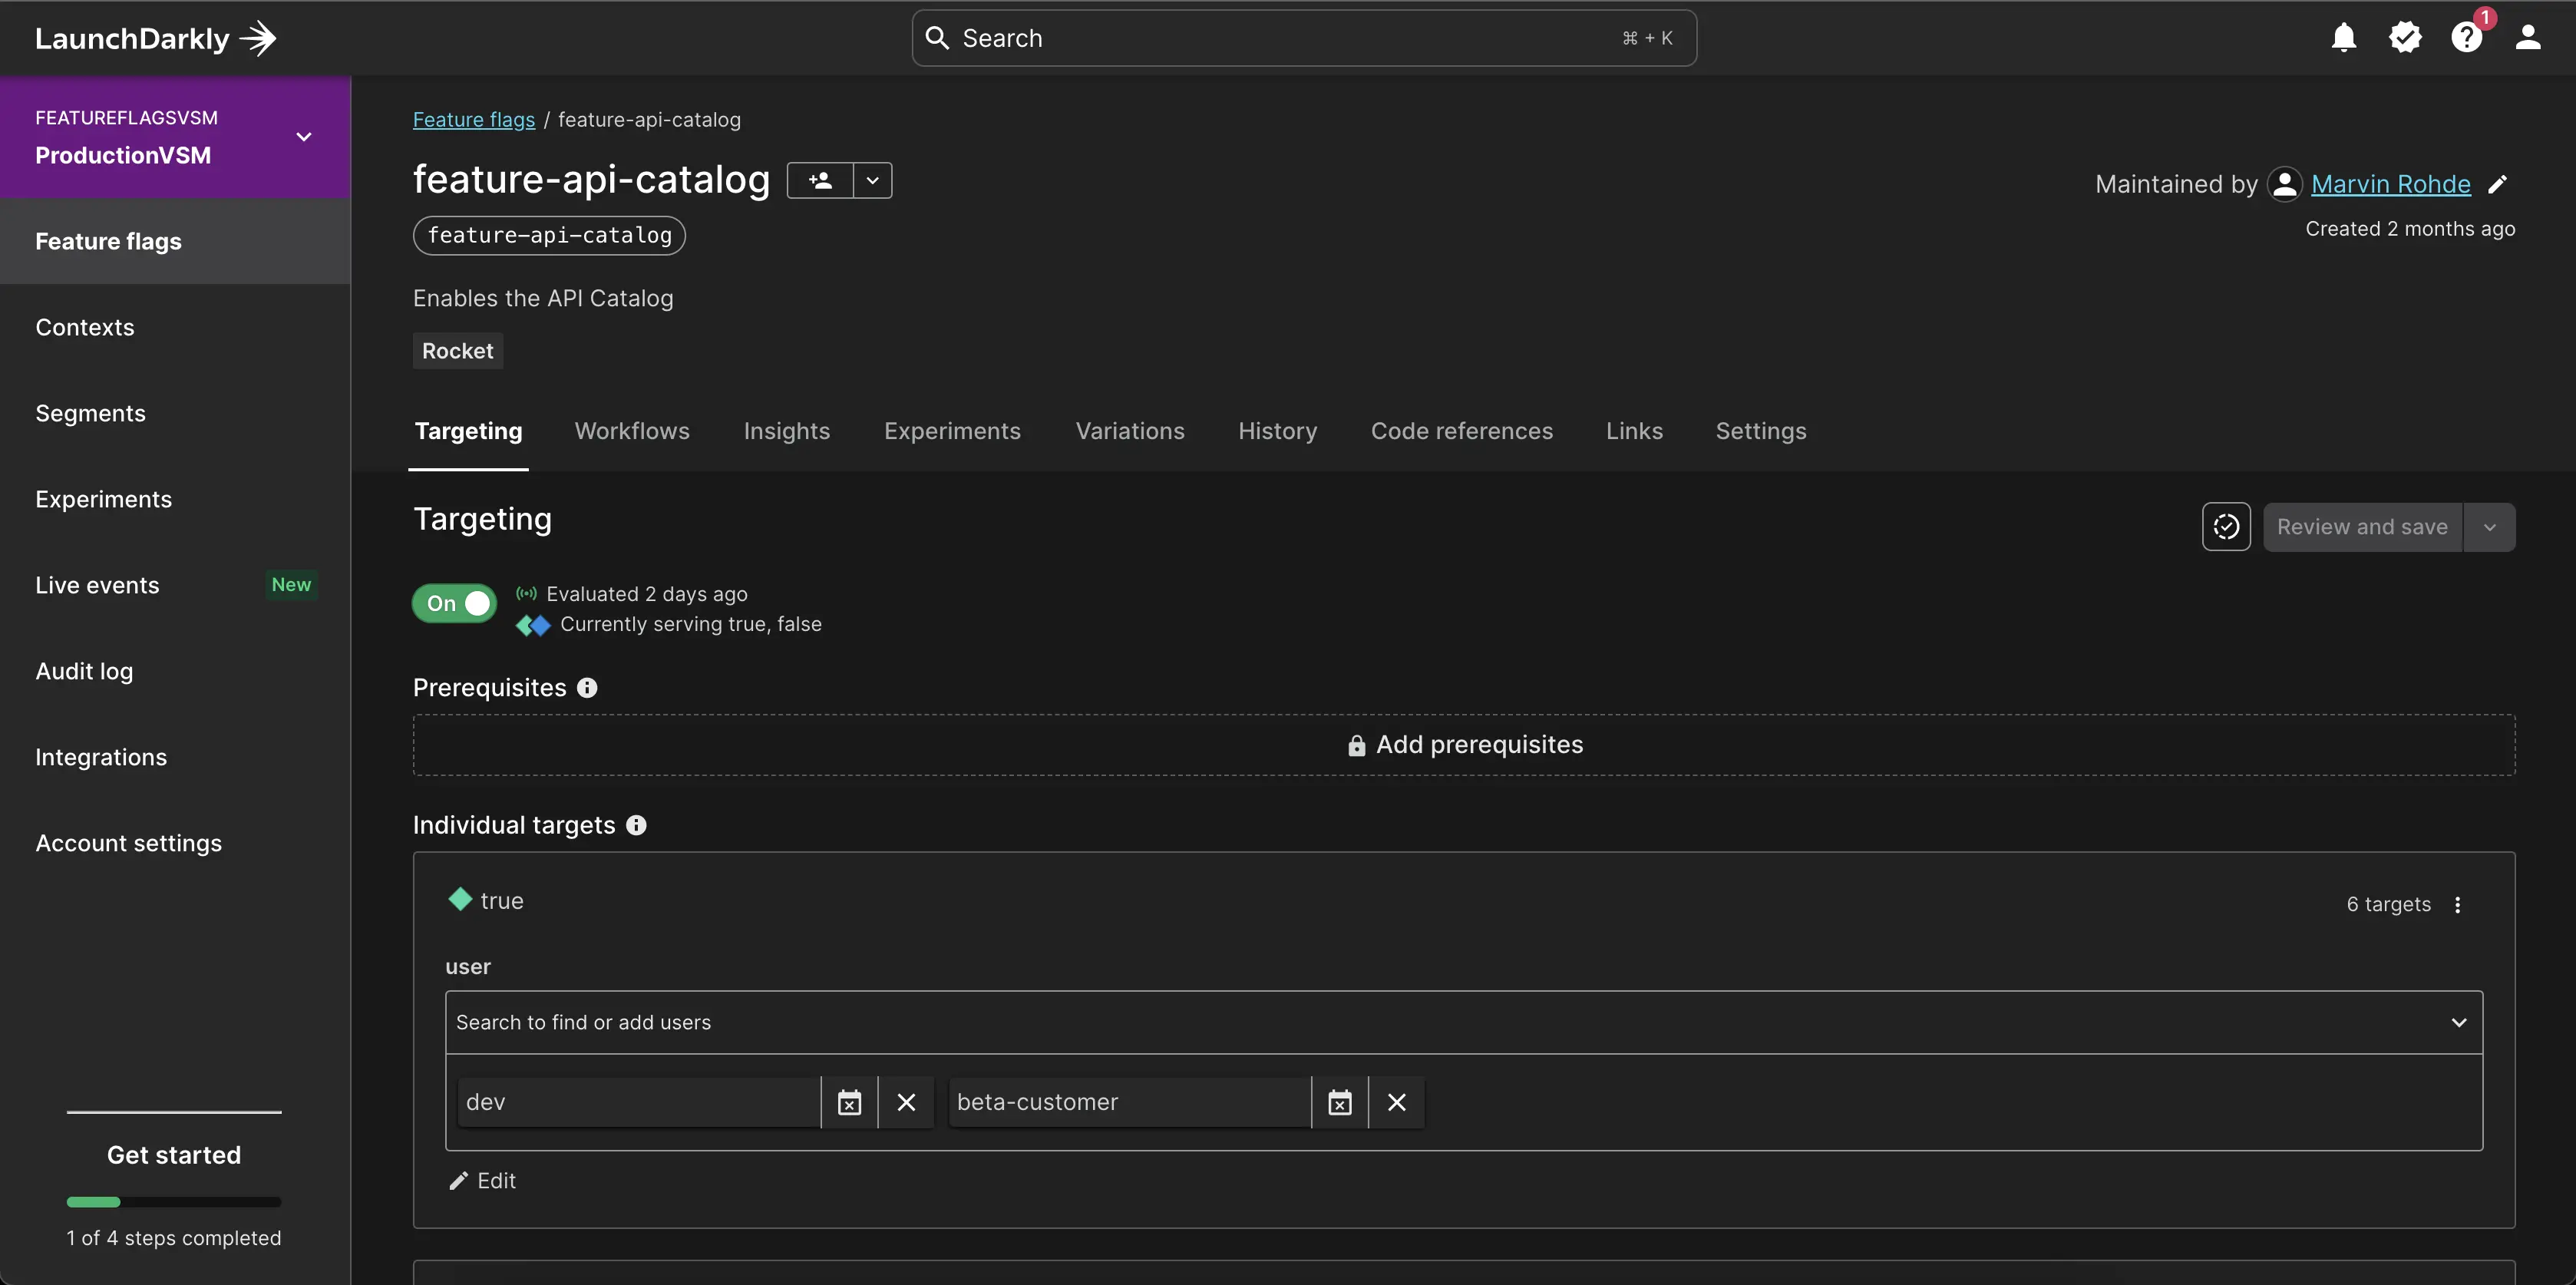 User interface of LaunchDarkly when adjusting settings of a feature flag